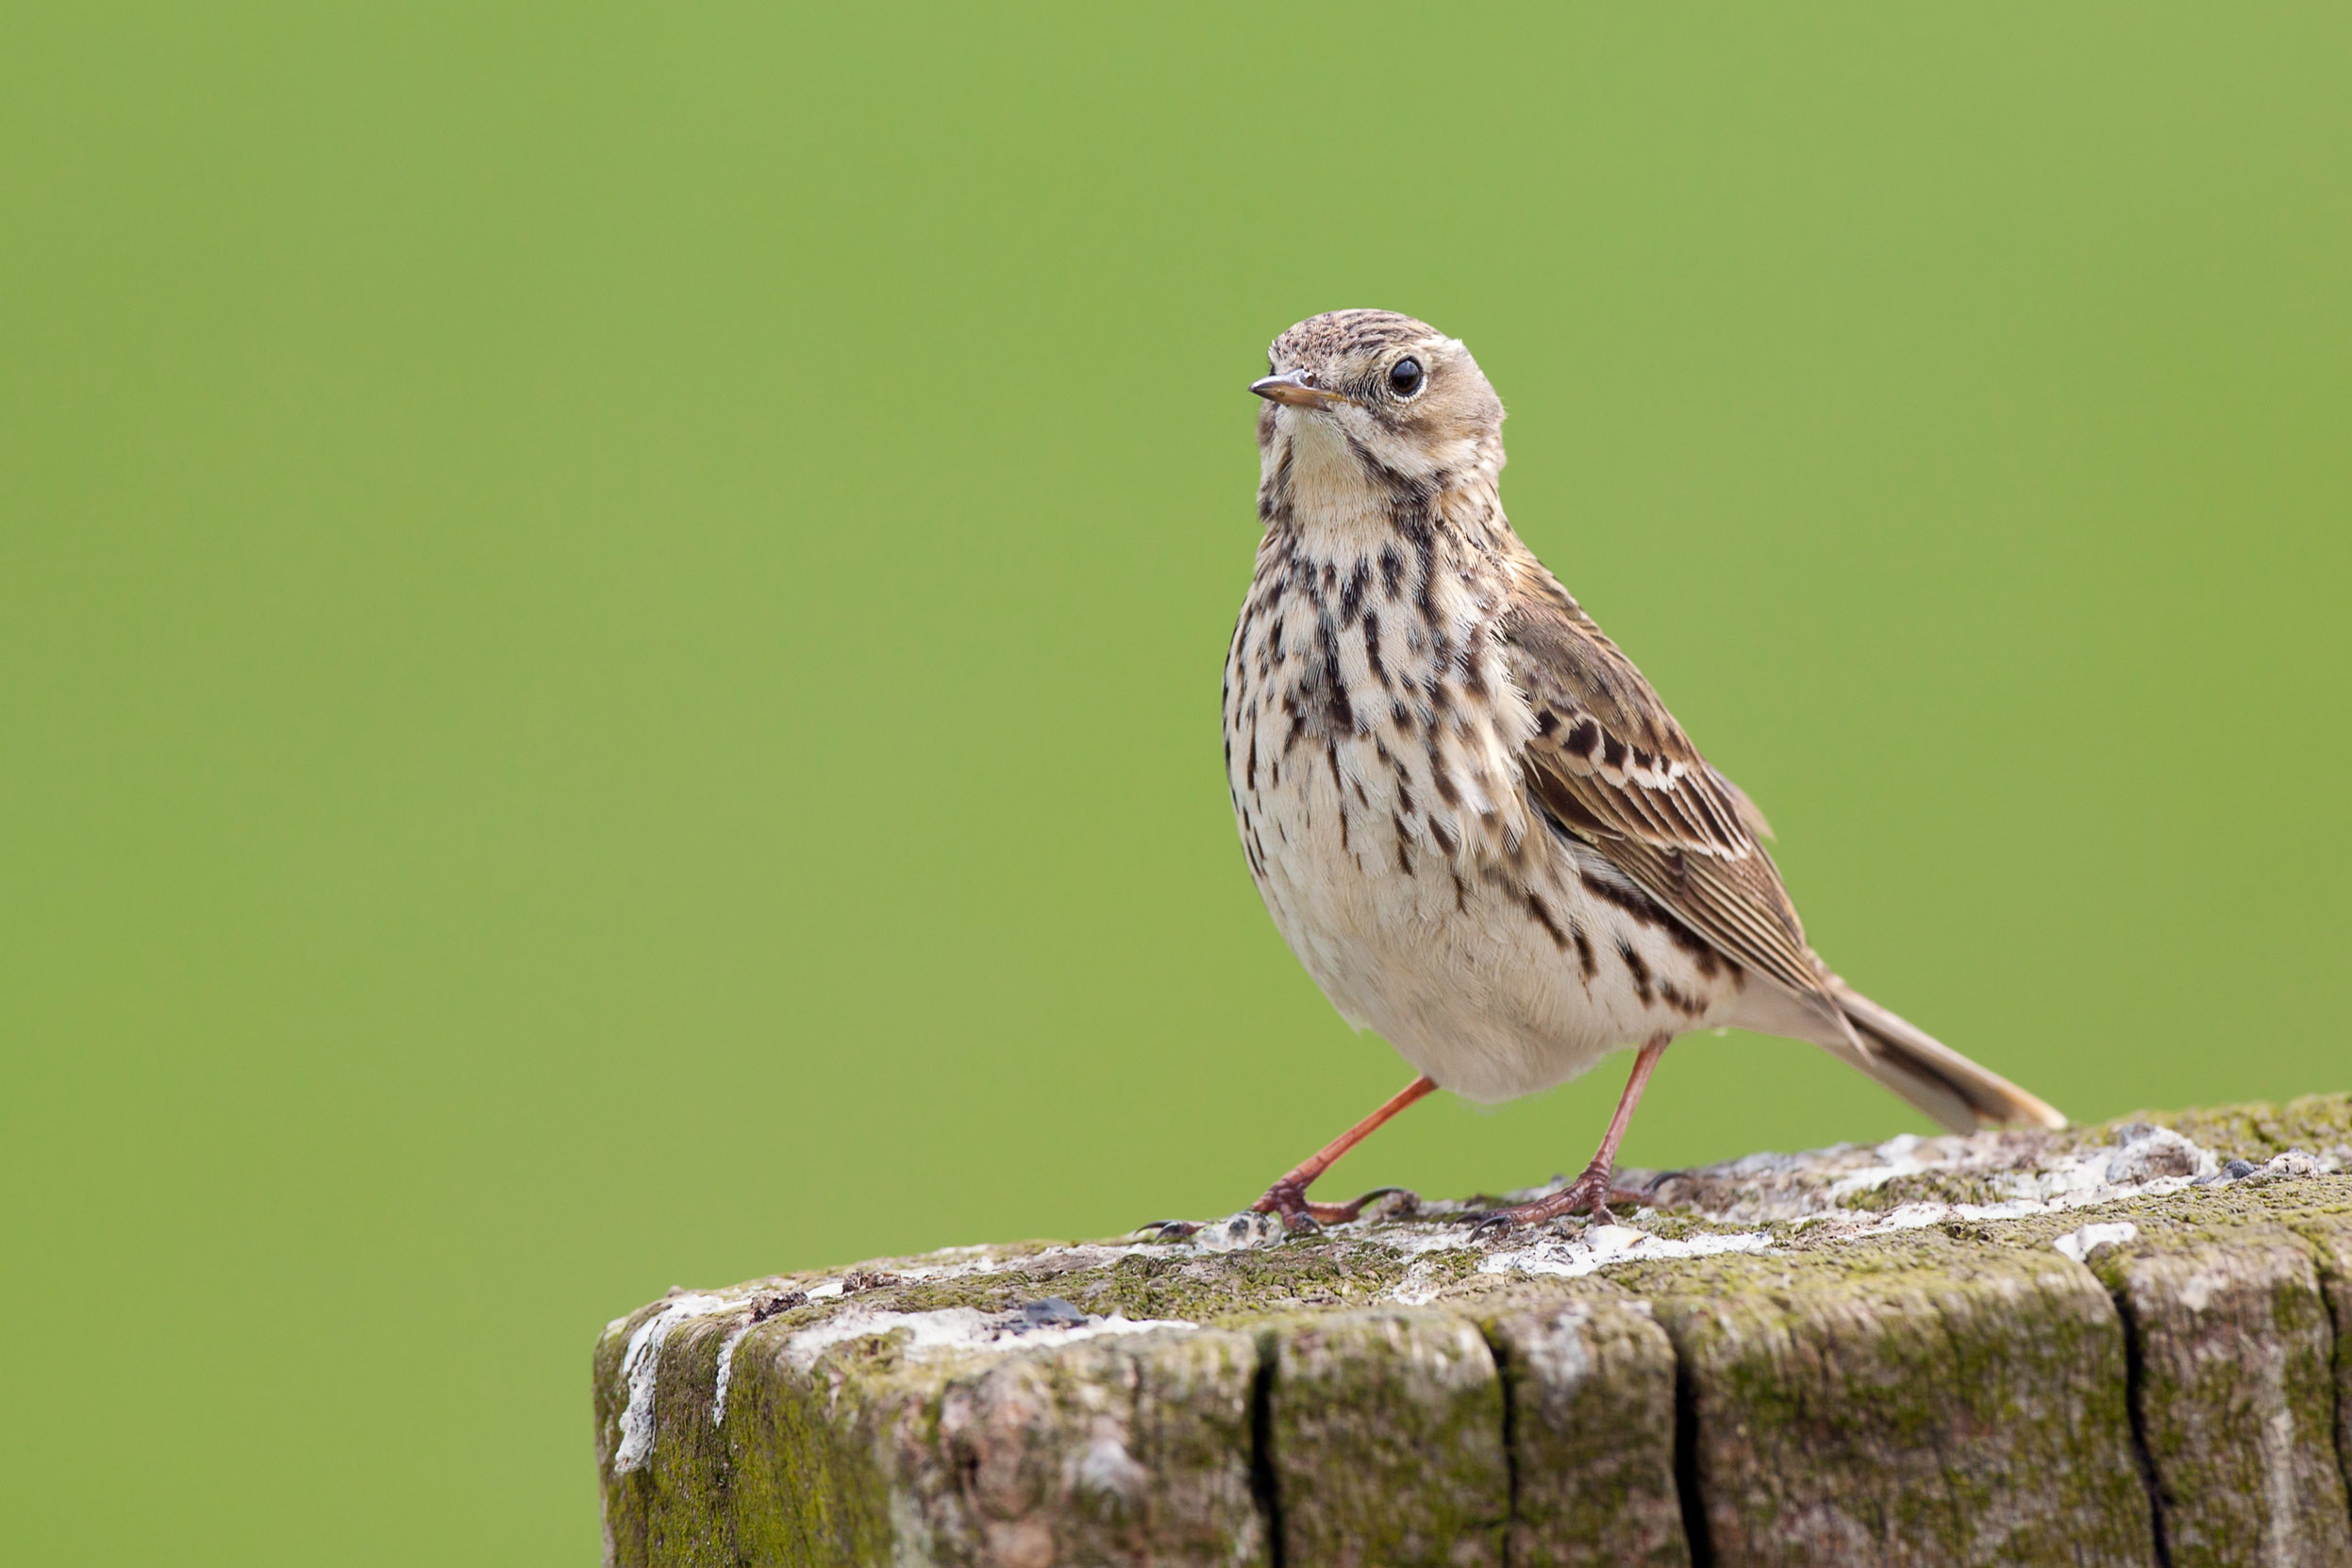 A Meadow Pipit perched on a wooden fence post against a leafy green background.